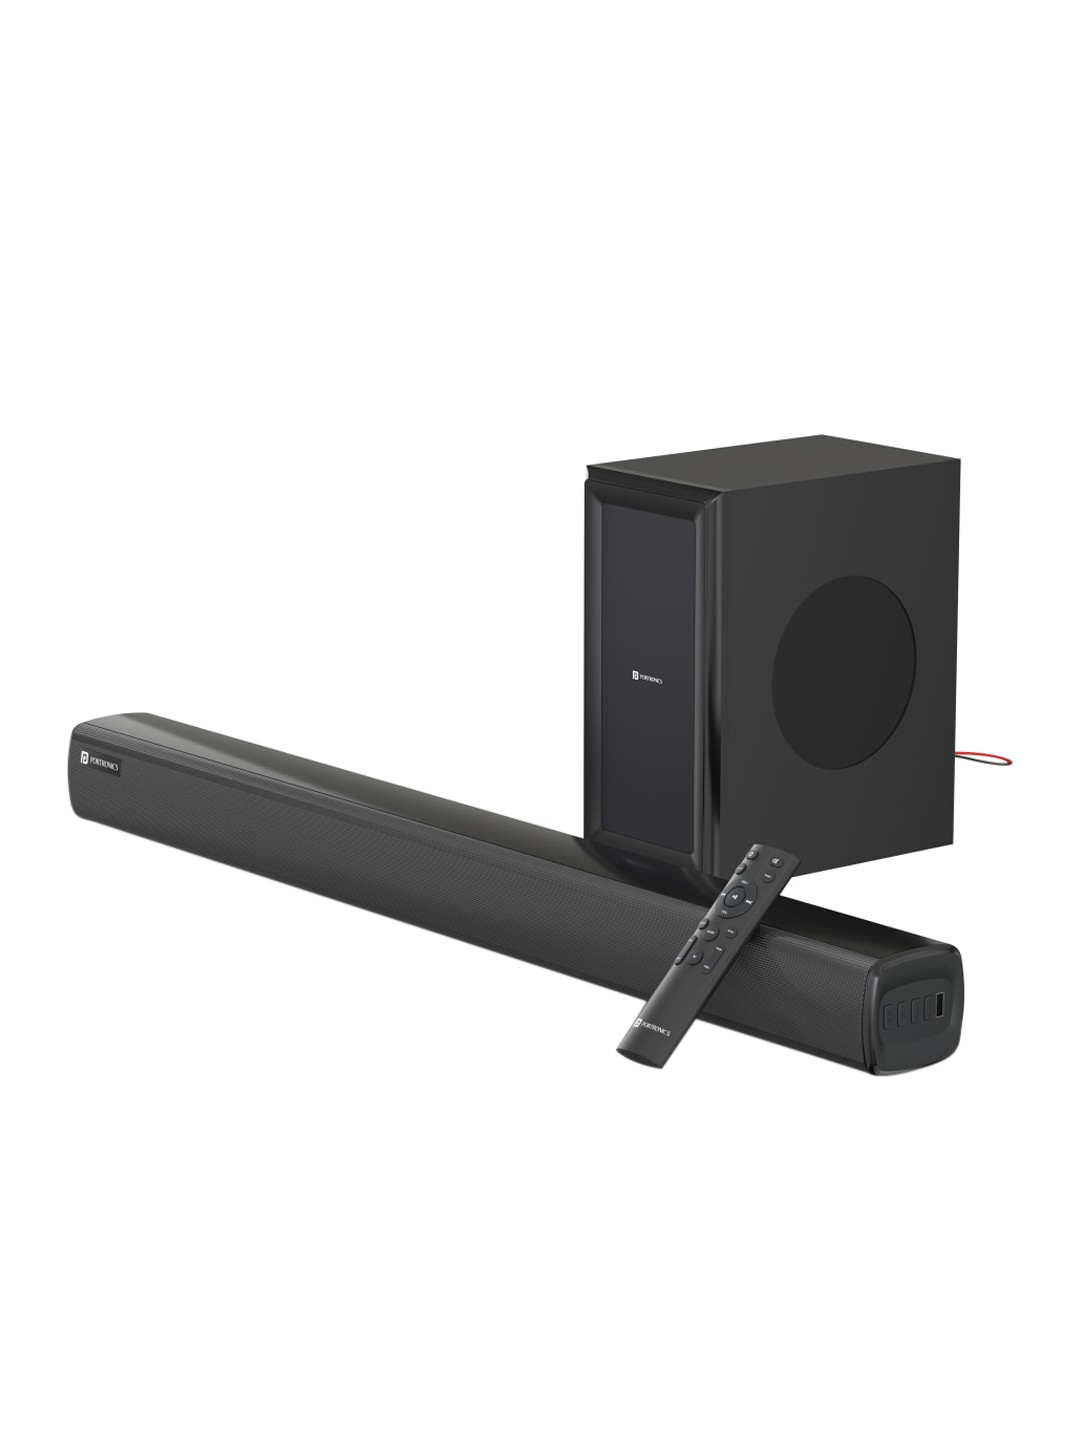 Portronics Black Pure Sound 101 Soundbar with Wired Woofer Price in India